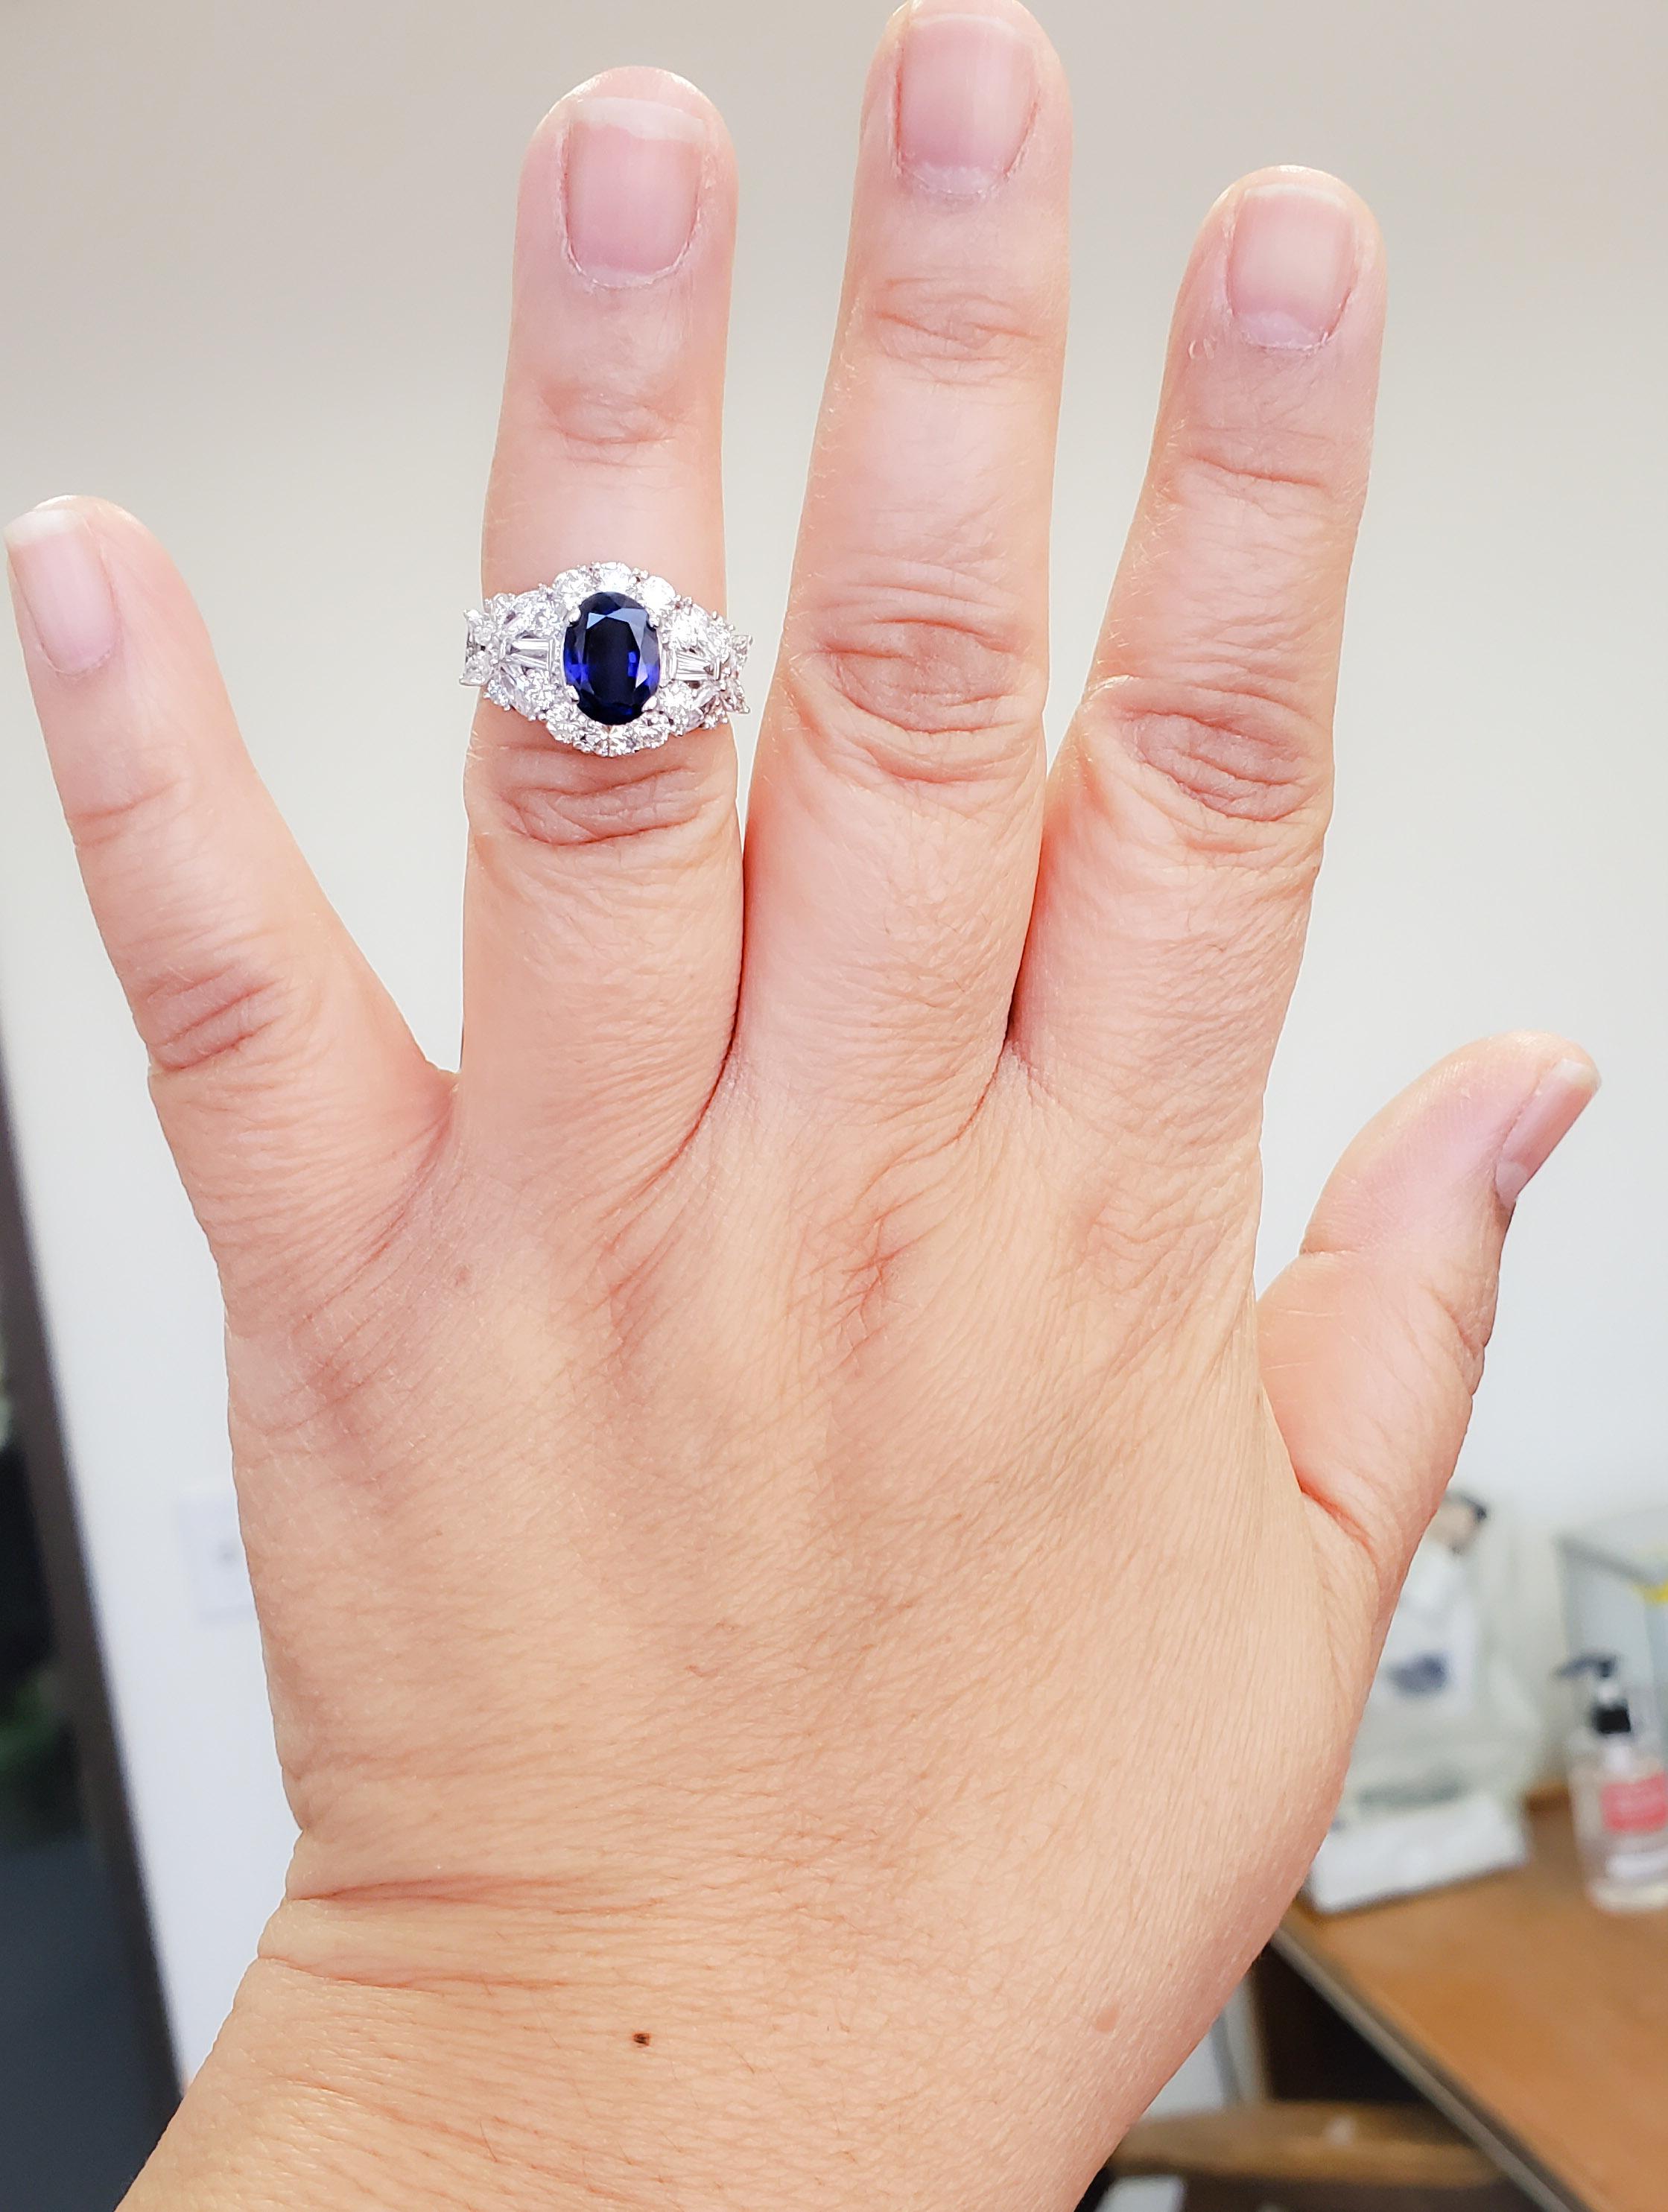 Beautiful 1.96 ct. bright blue sapphire oval with 2.25 ct. good quality white diamond rounds, marquises, and baguettes.  Handmade 18k white gold mounting in ring size 6.